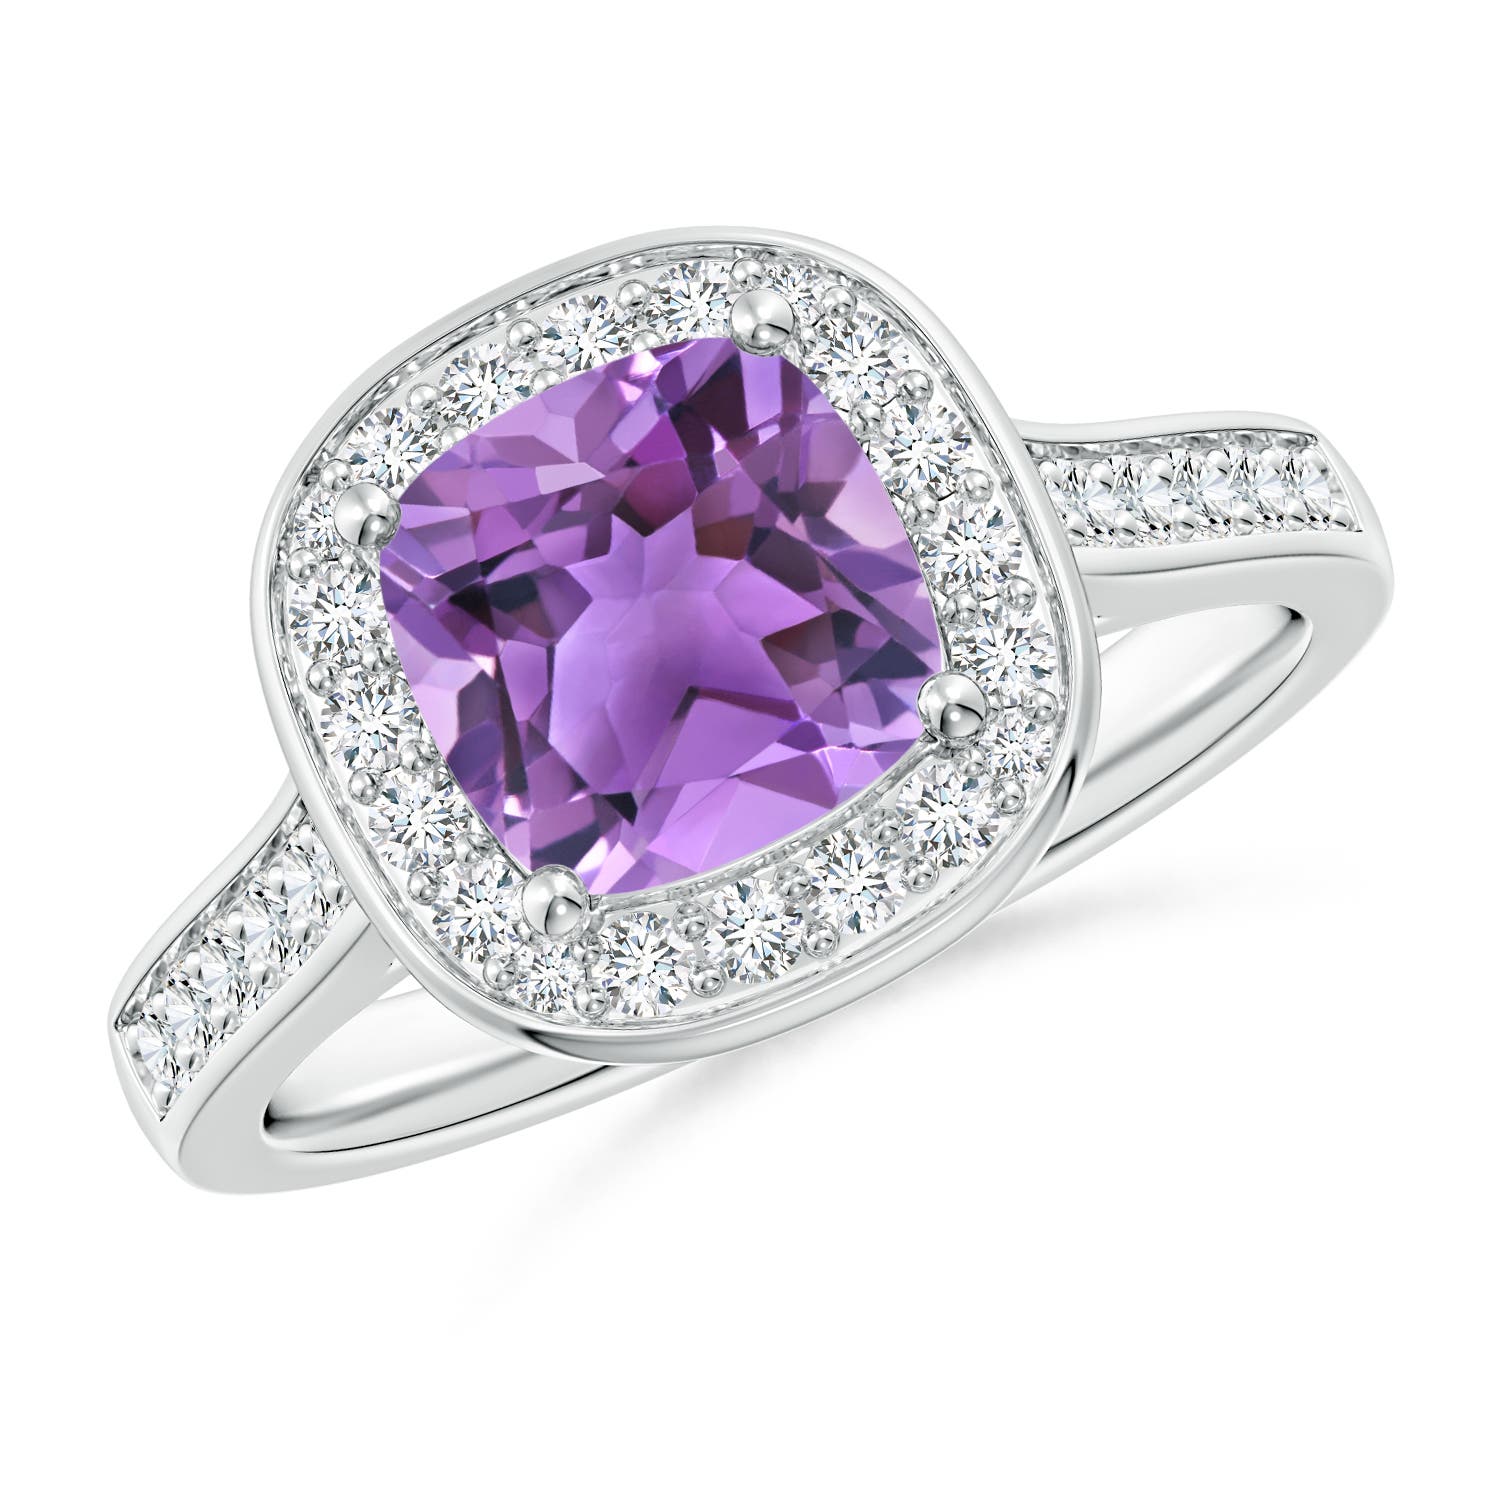 AA - Amethyst / 1.74 CT / 14 KT White Gold